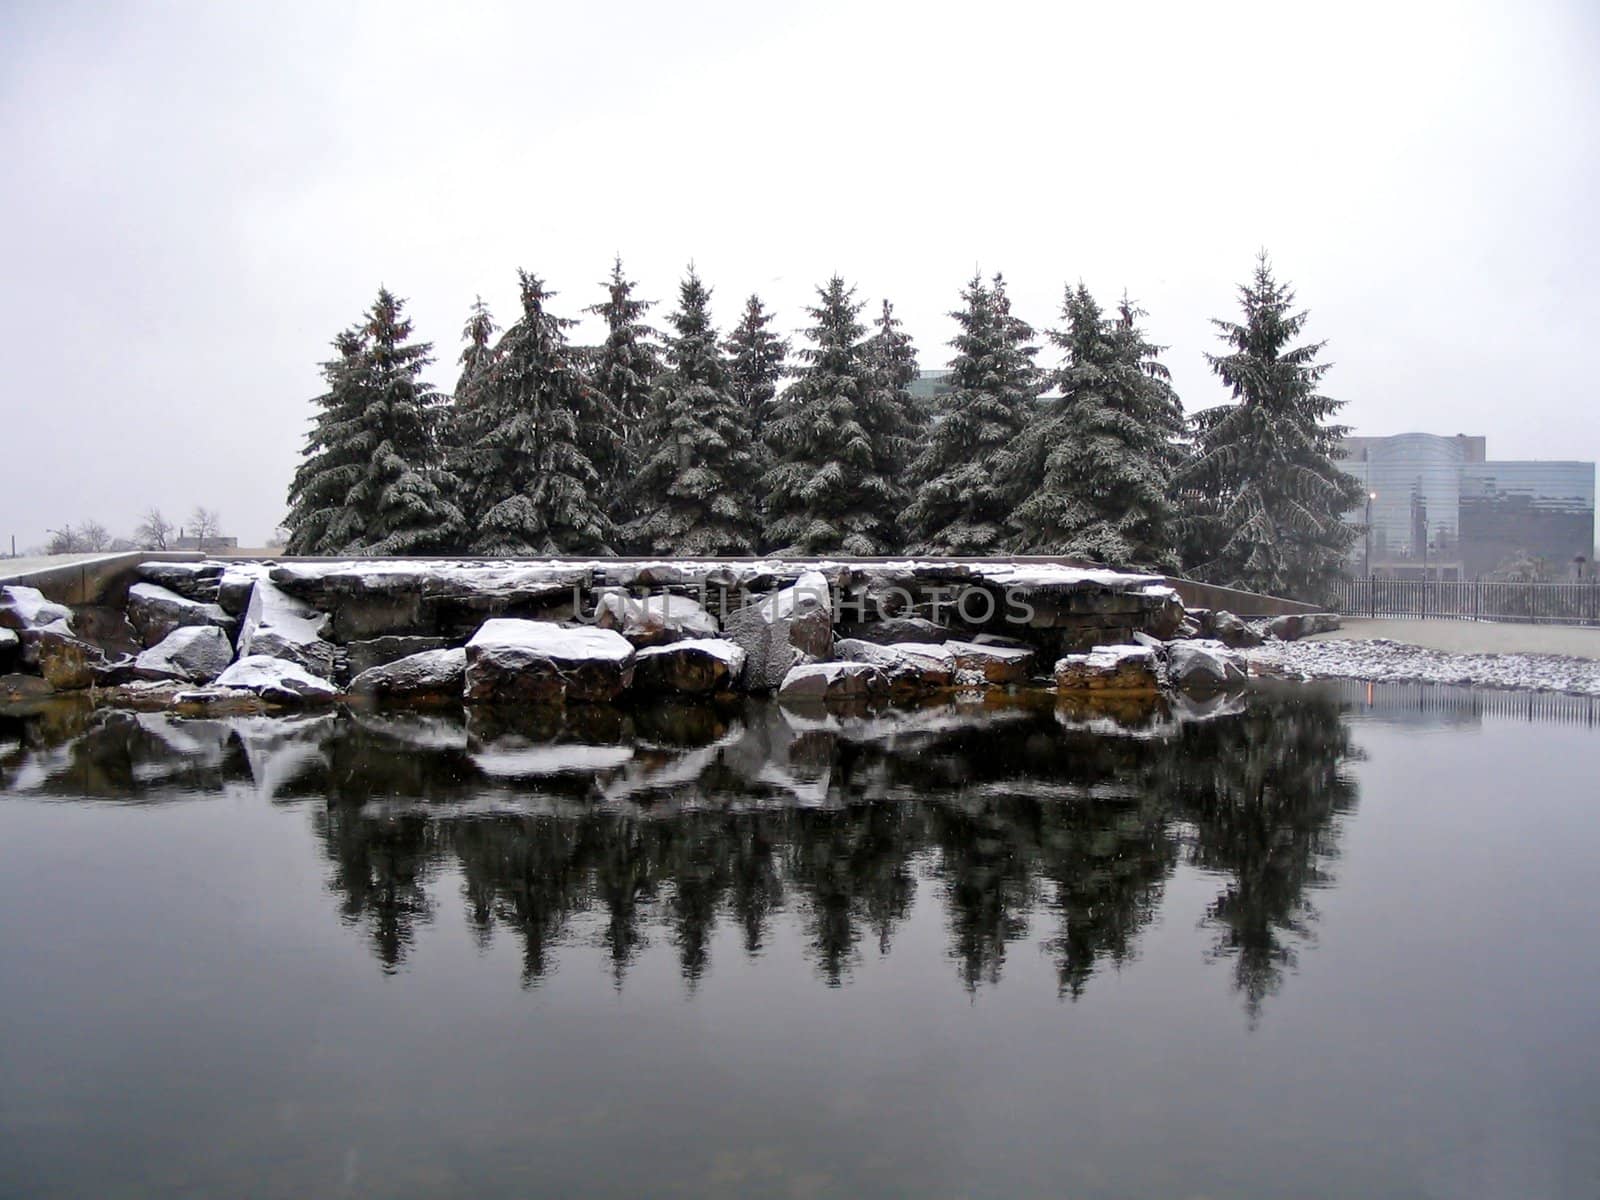 This is a picture of a small pond with pine trees and a office building in the background as snow is falling from the grey skies.